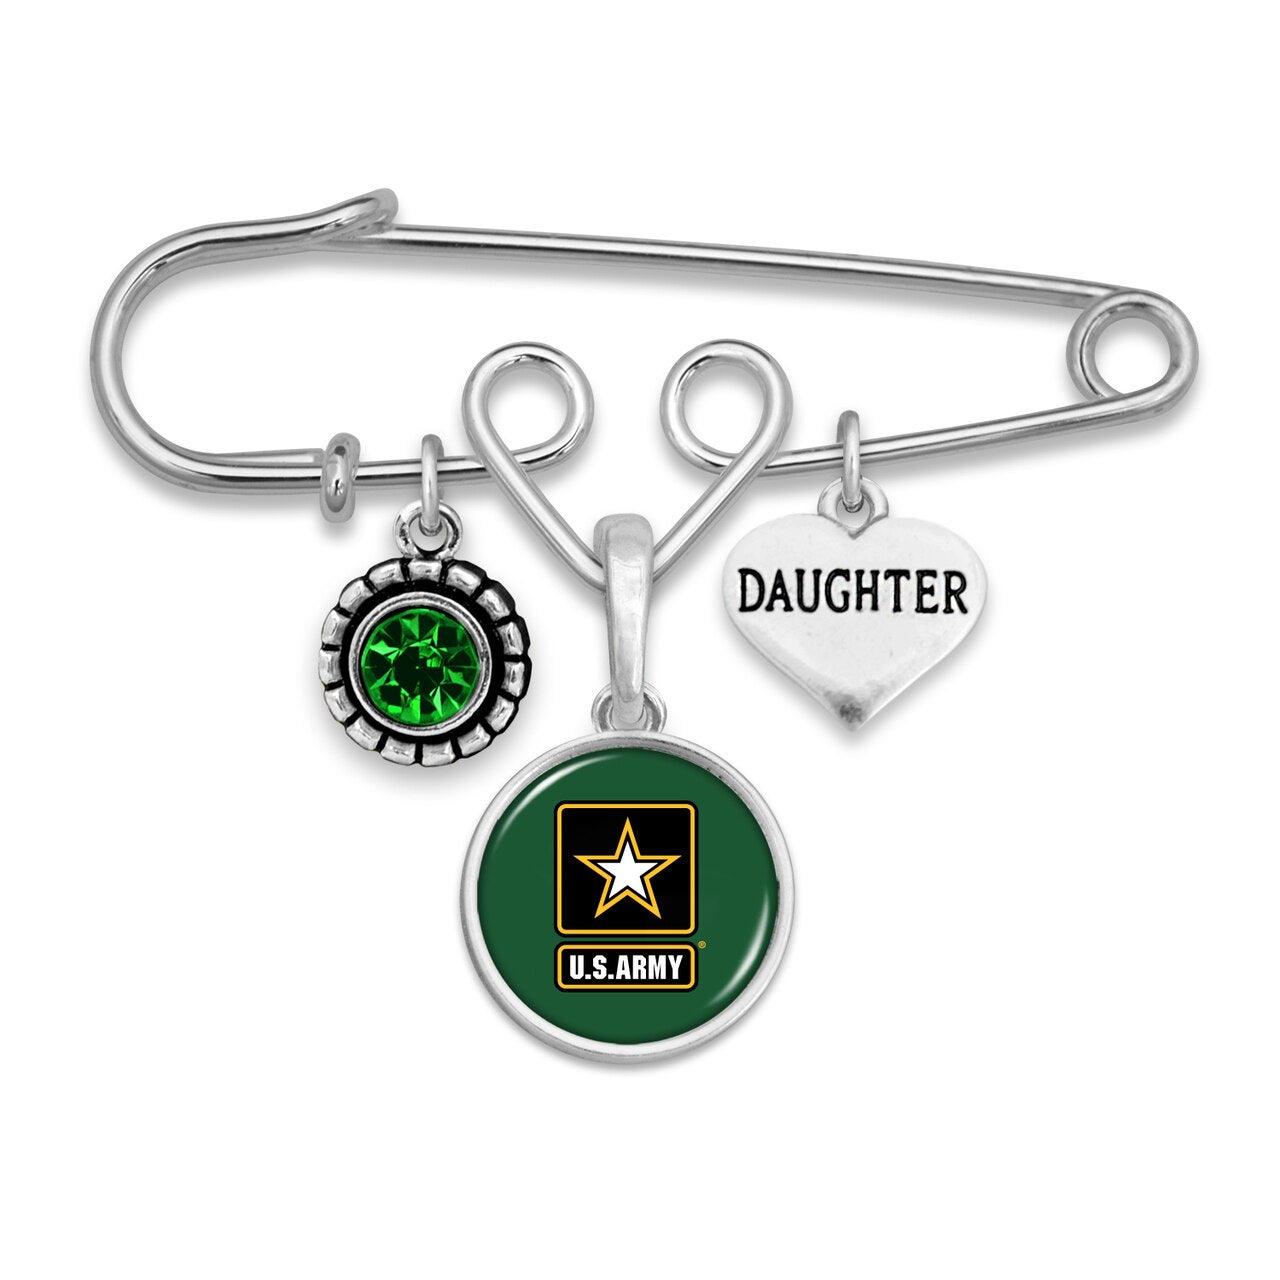 U.S. Army Daughter Accent Charm Brooch - Military Republic